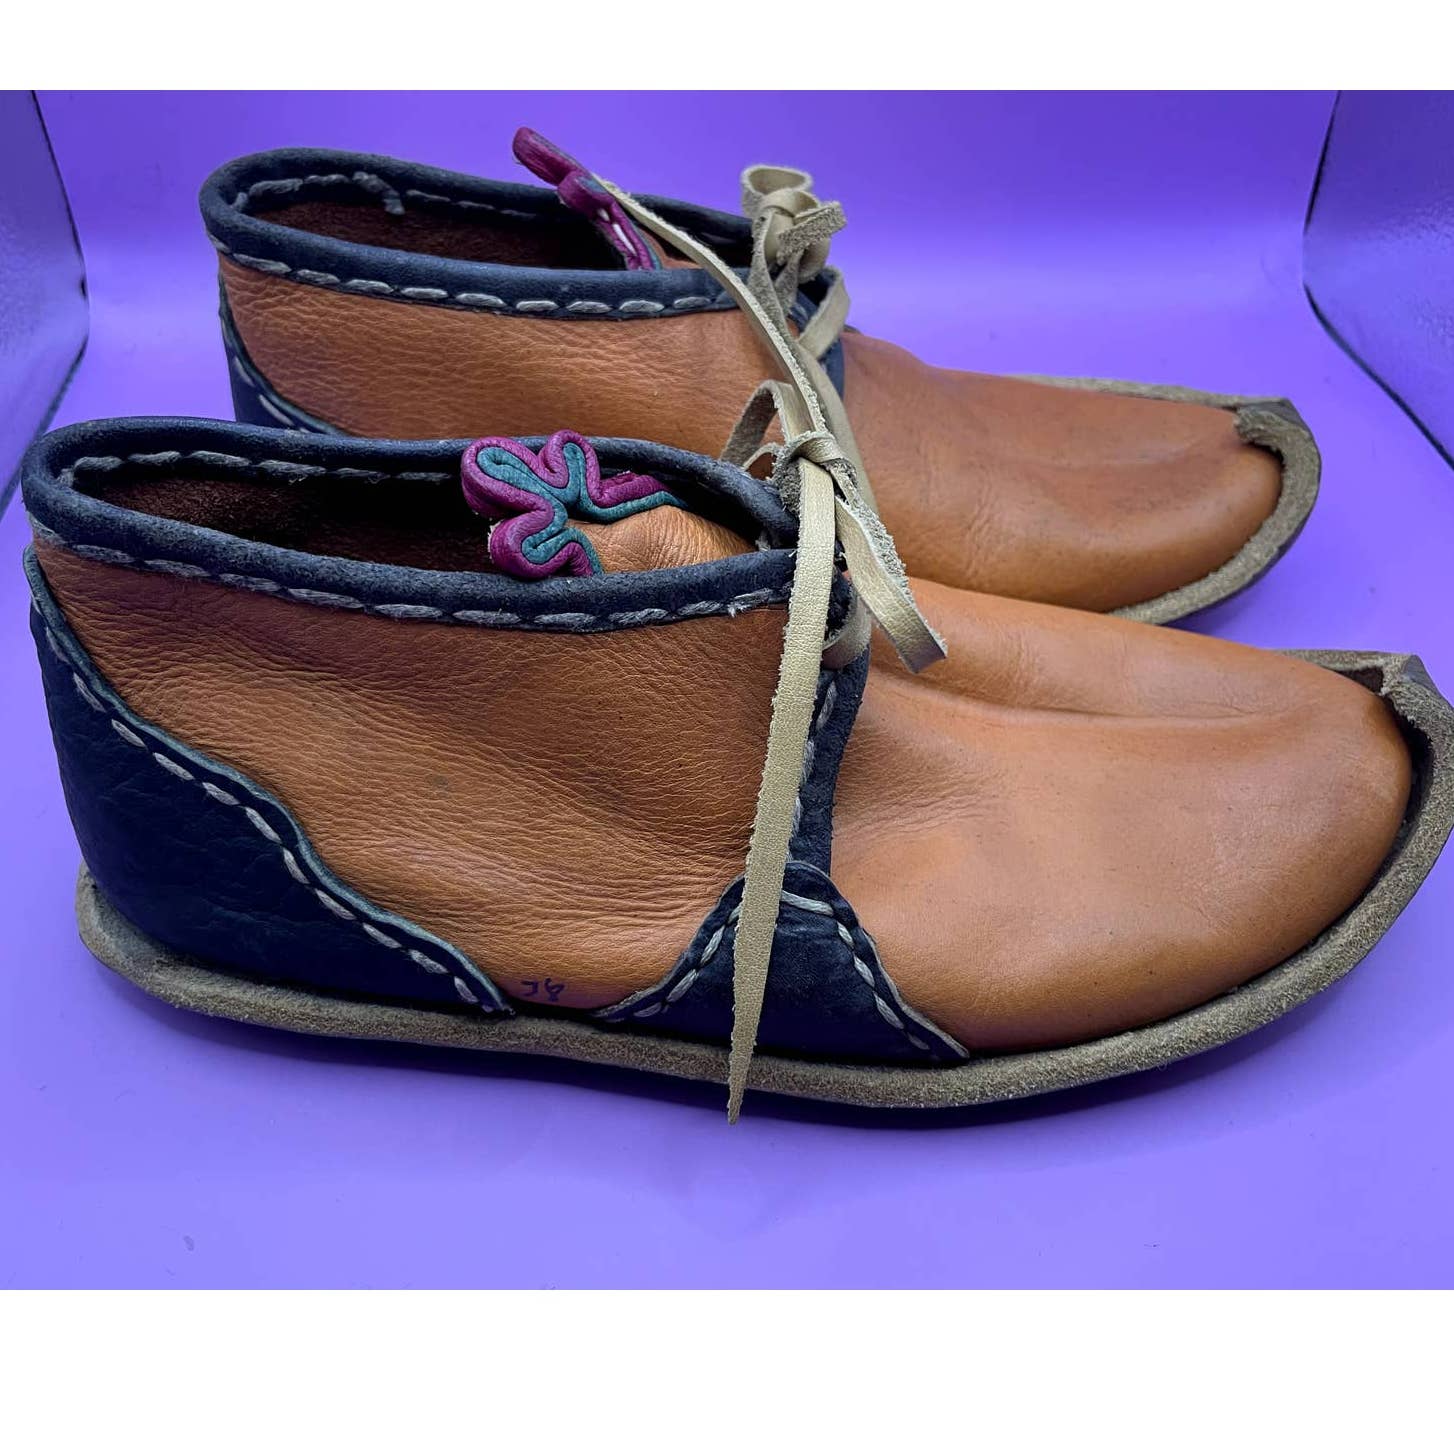 Vintage Handmade Carmel and Navy Curl Toed Booties Shoes - 38 / 8